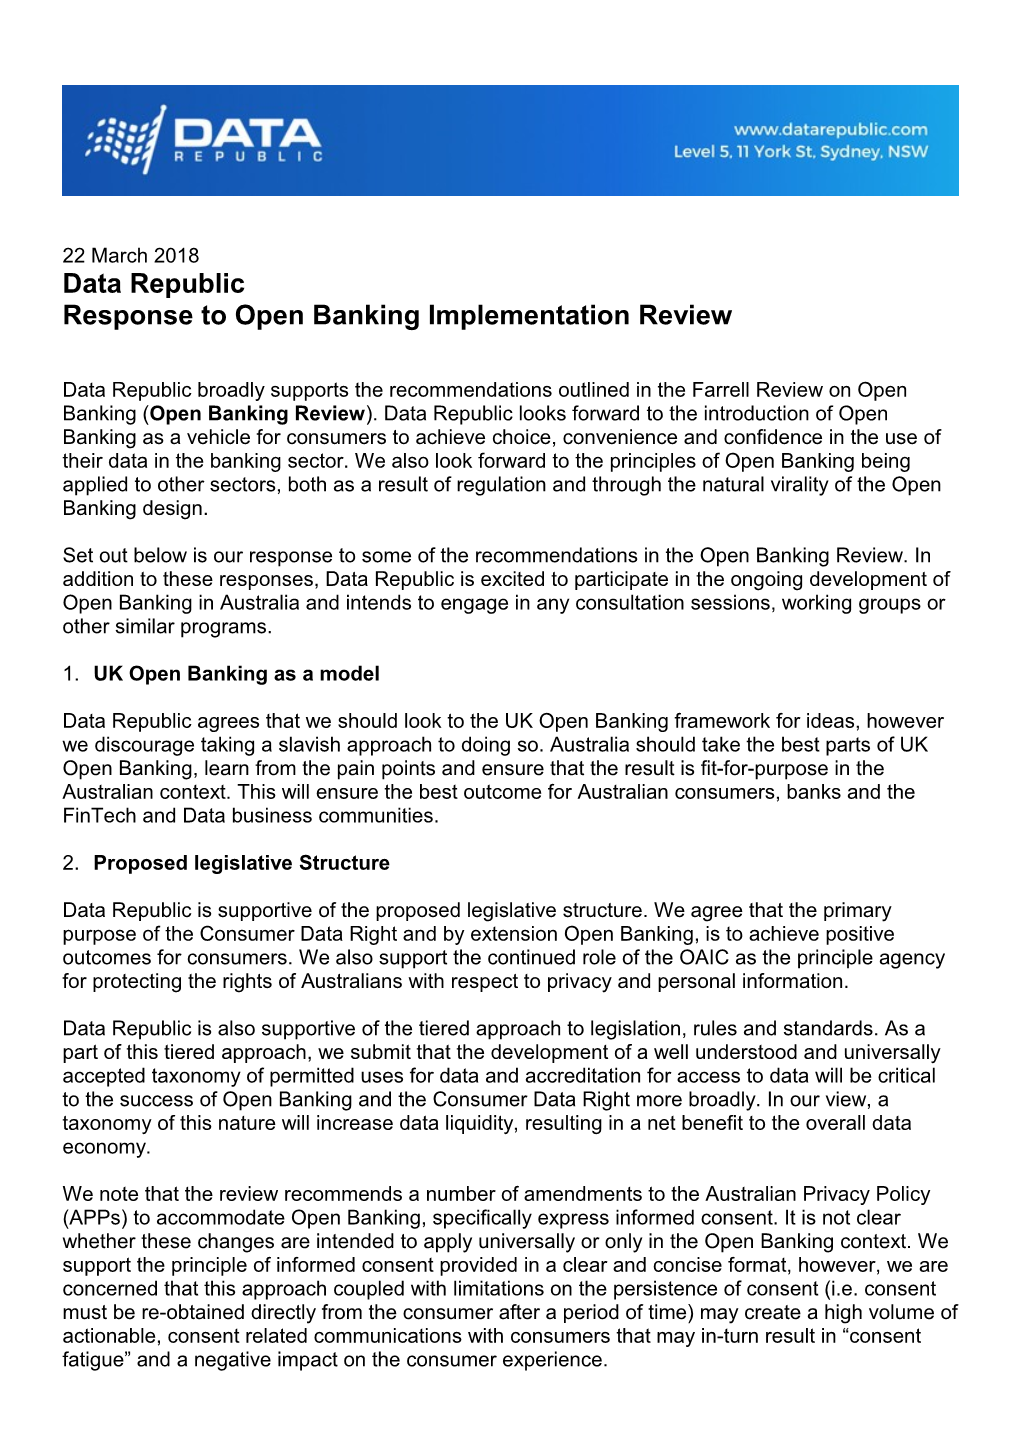 Response to Open Banking Implementation Review